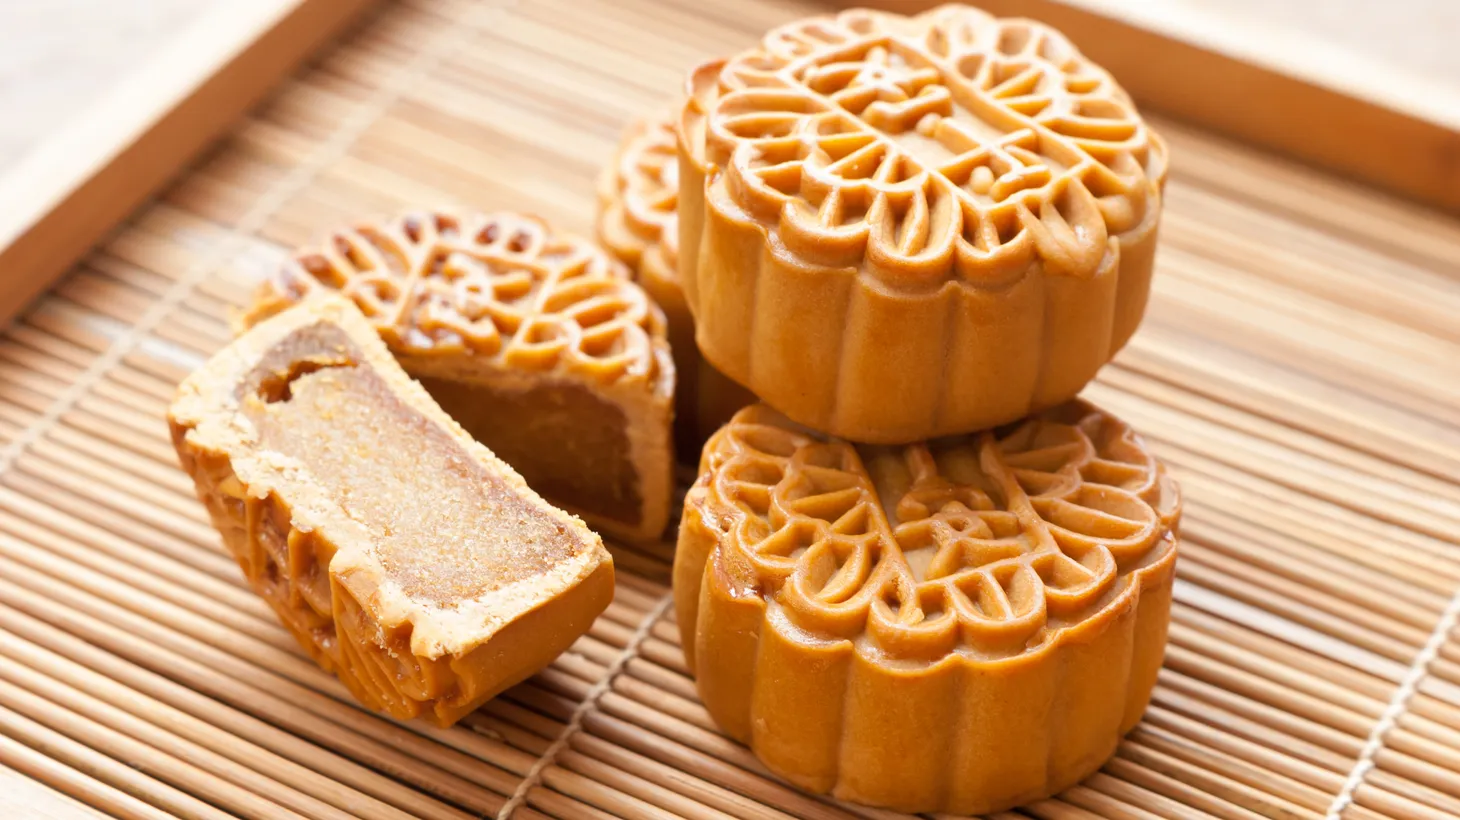 Some of the most popular mooncake fillings include lotus paste and salted egg yolk or blended nuts, but contemporary flavors like matcha or chocolate have become more common.